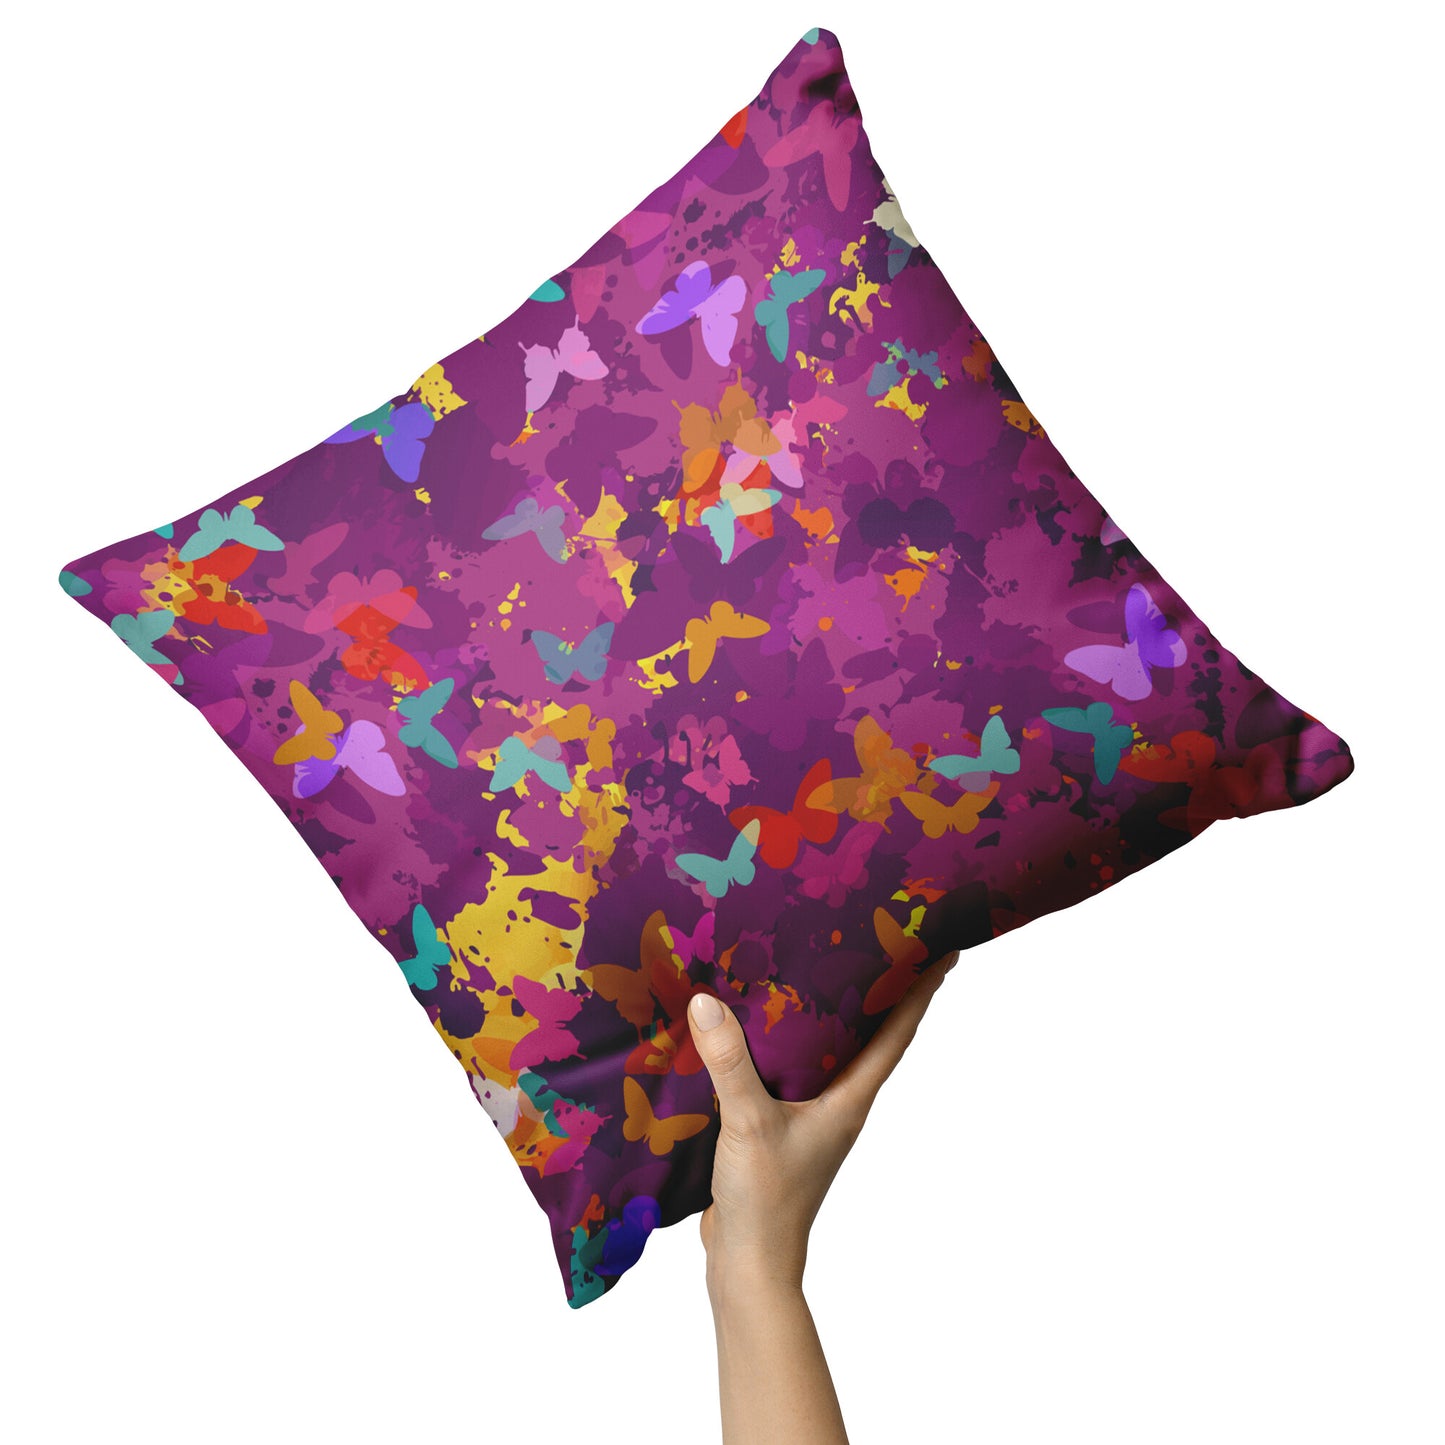 Love Life - Butterflies - Pillows And Covers